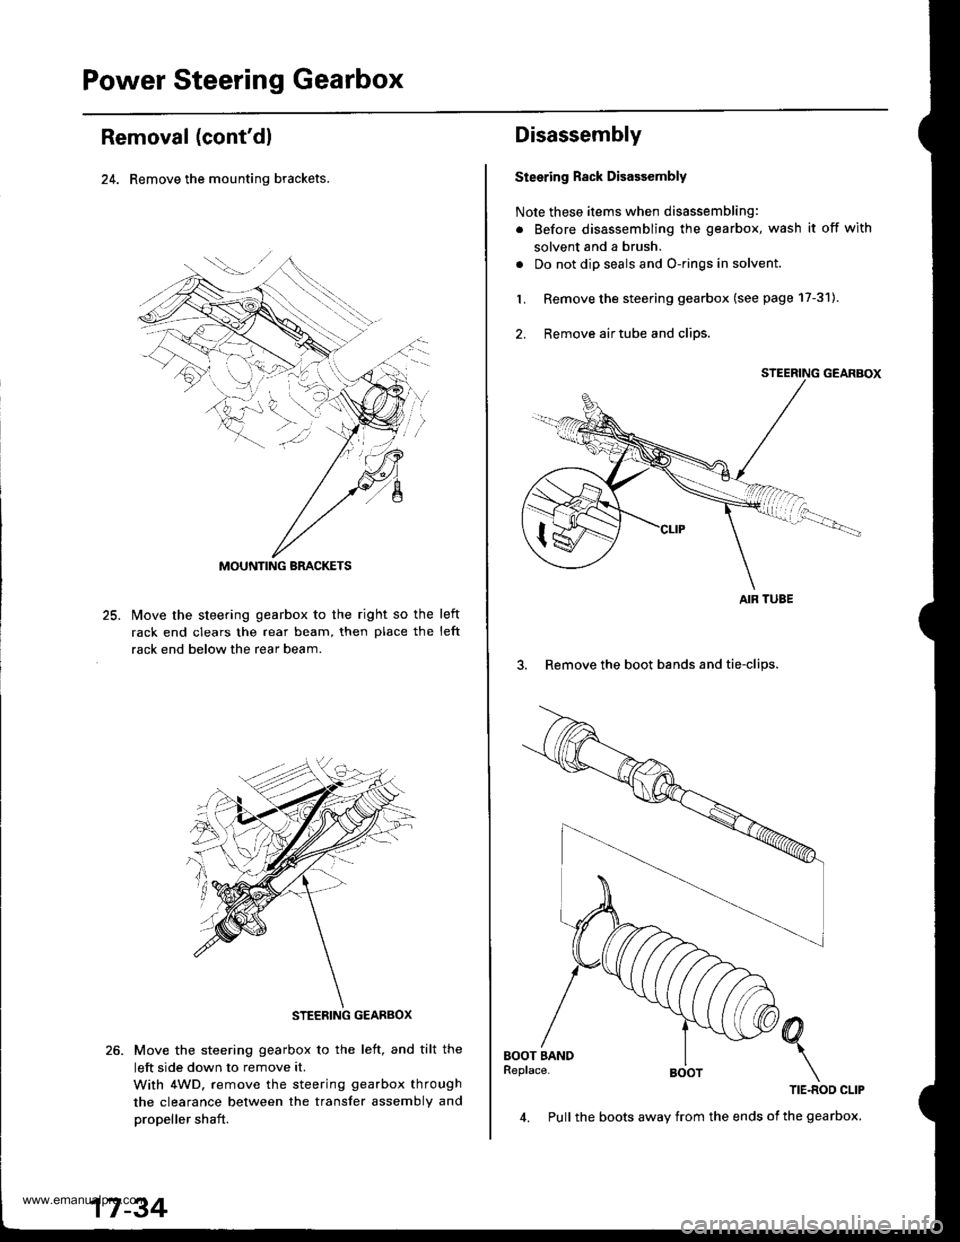 HONDA CR-V 1997 RD1-RD3 / 1.G User Guide 
Power Steering Gearbox
Removal (contdl
24. Remove the mounting brackets.
25.lvlove the steering gearbox to the right so the
rack end clears the rear beam, then place the
rack end below the rear beam